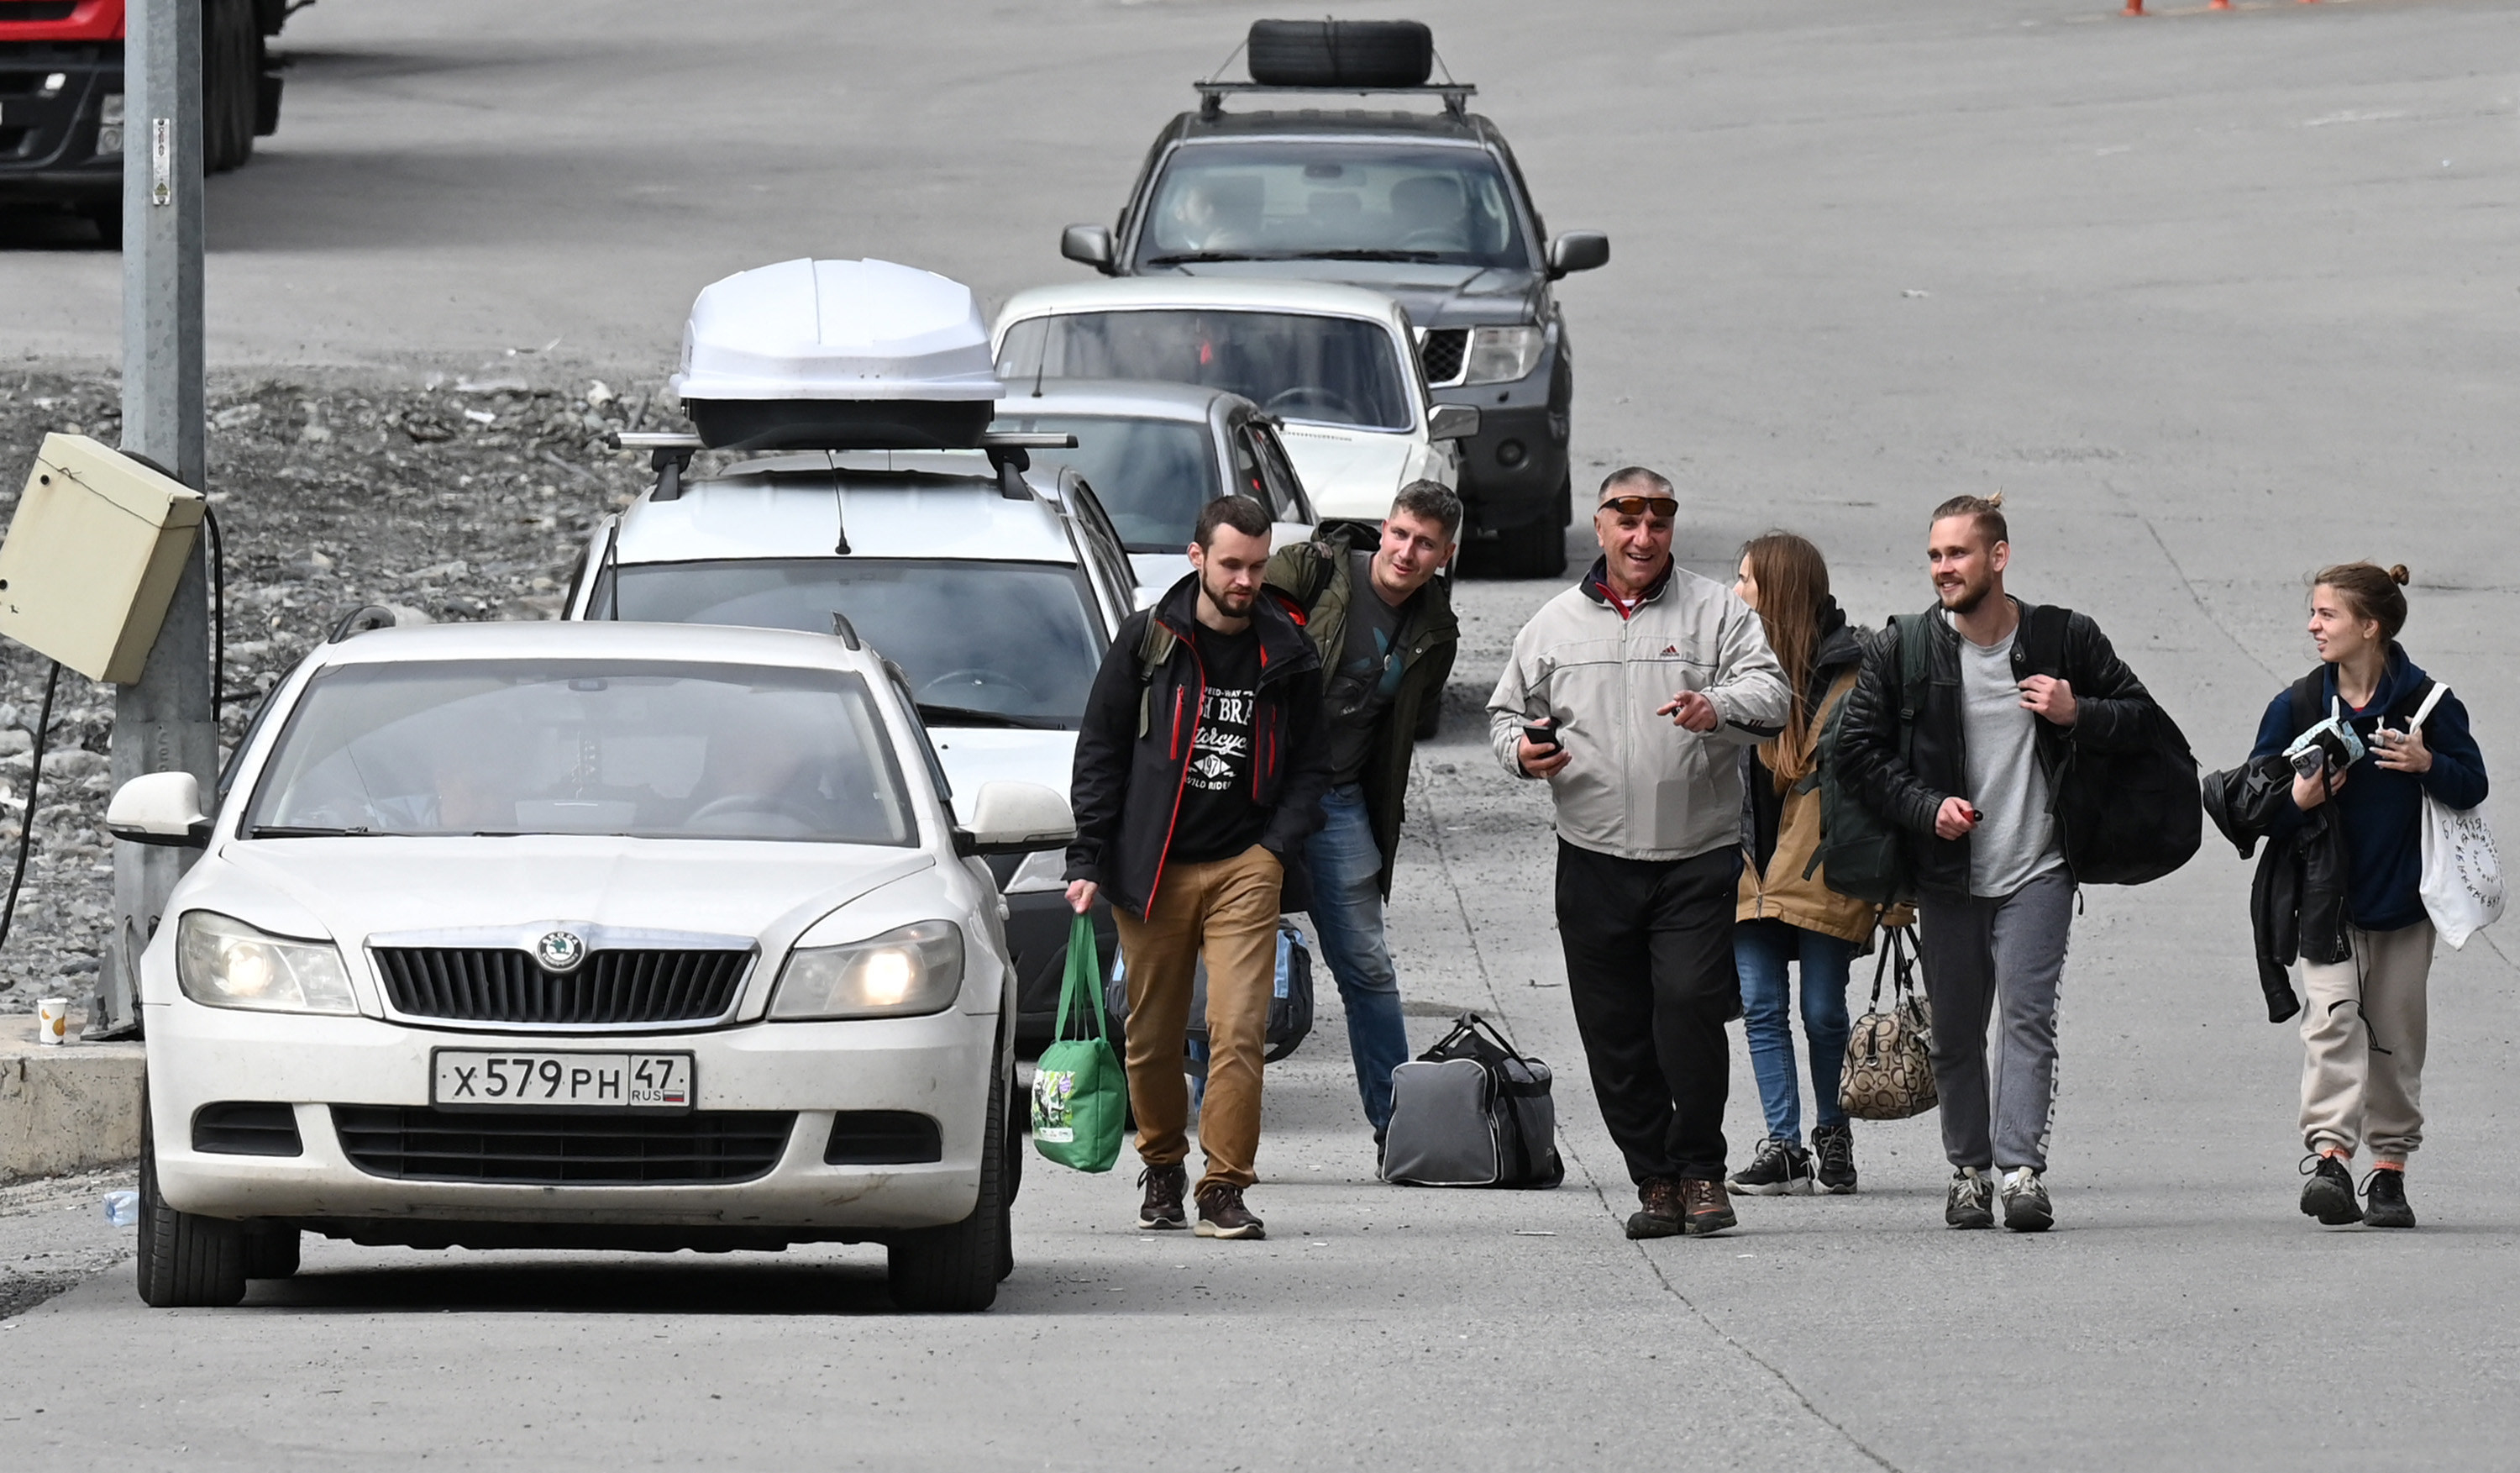 A group of people with luggage walk neck to a line of cars